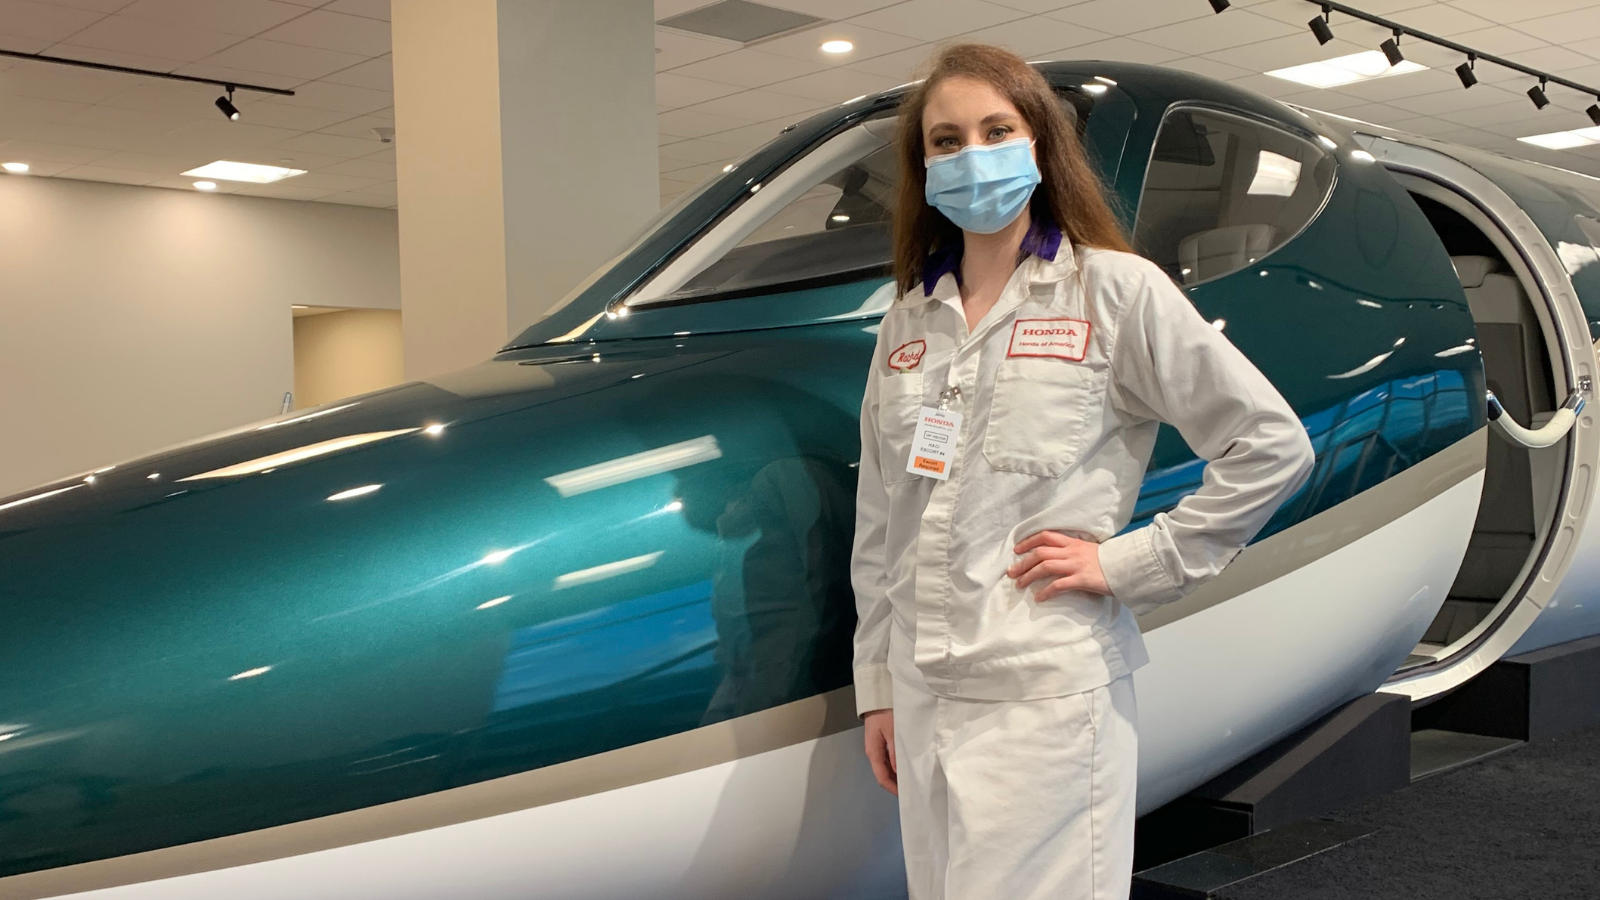 NRES graduate contributes to health and safety at Honda